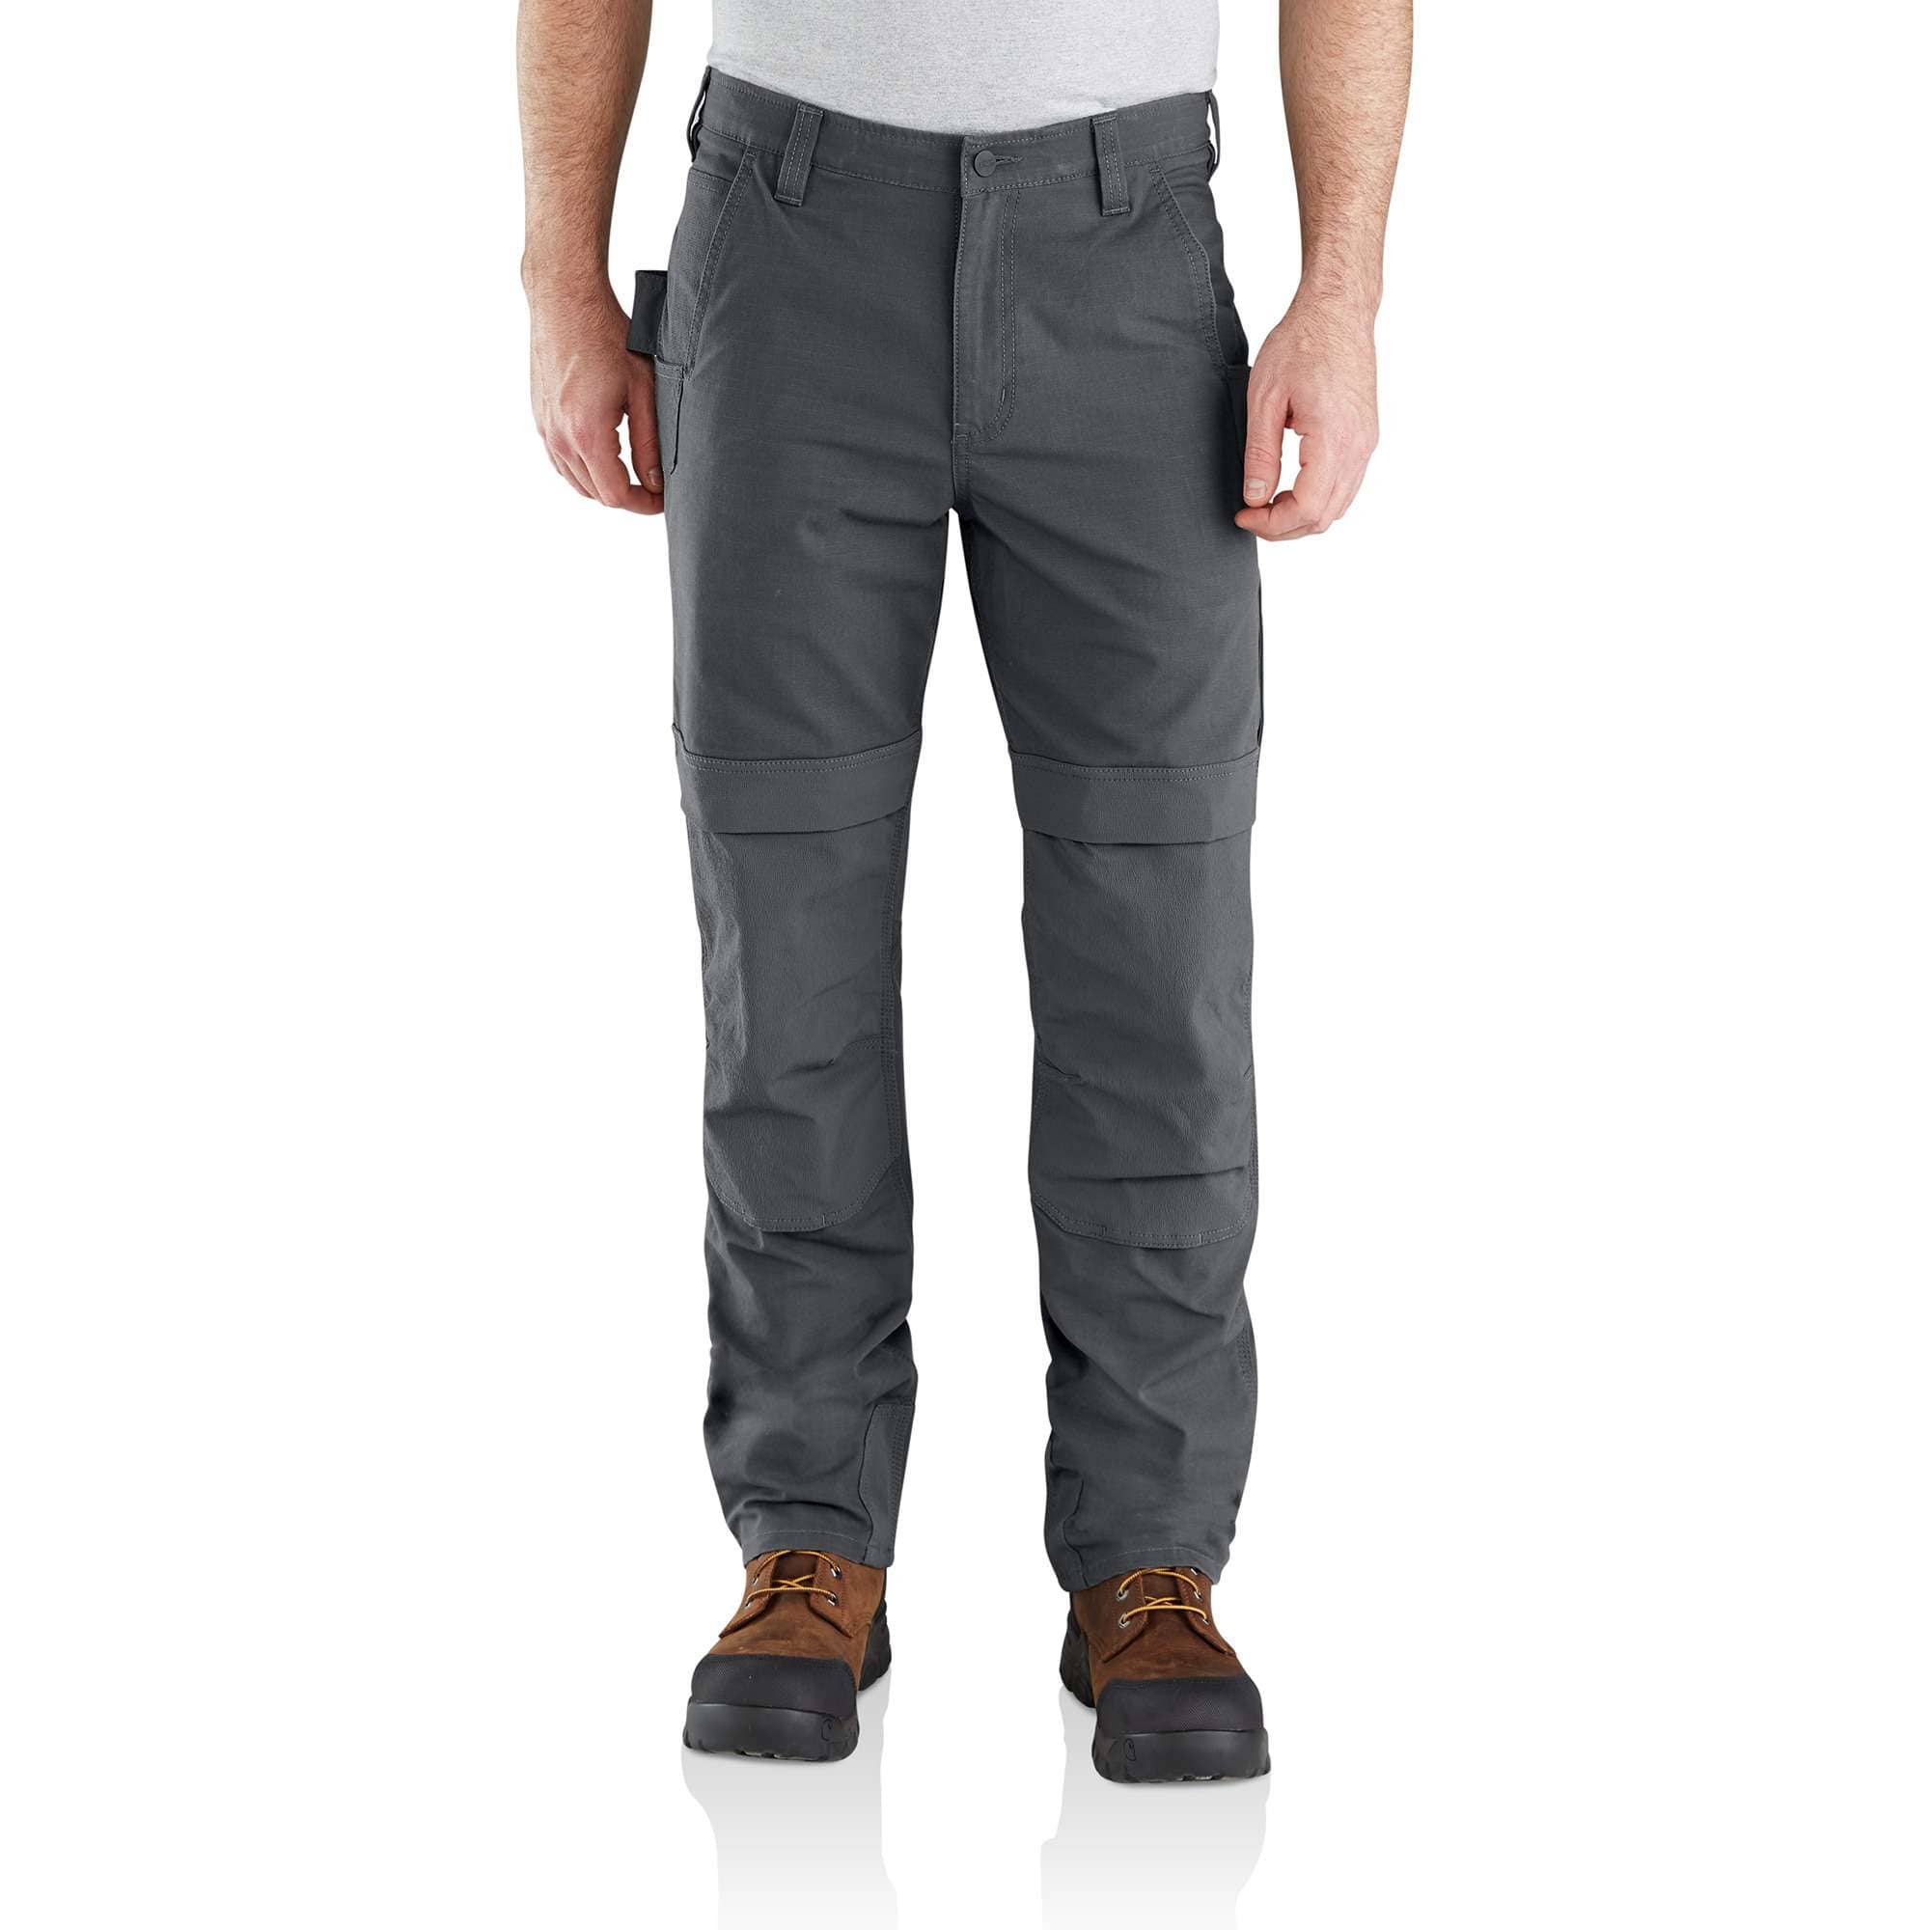 DuraDrive Men's LIBERATOR Grey and Black Stretch Work Pants with Zipper  Pocket